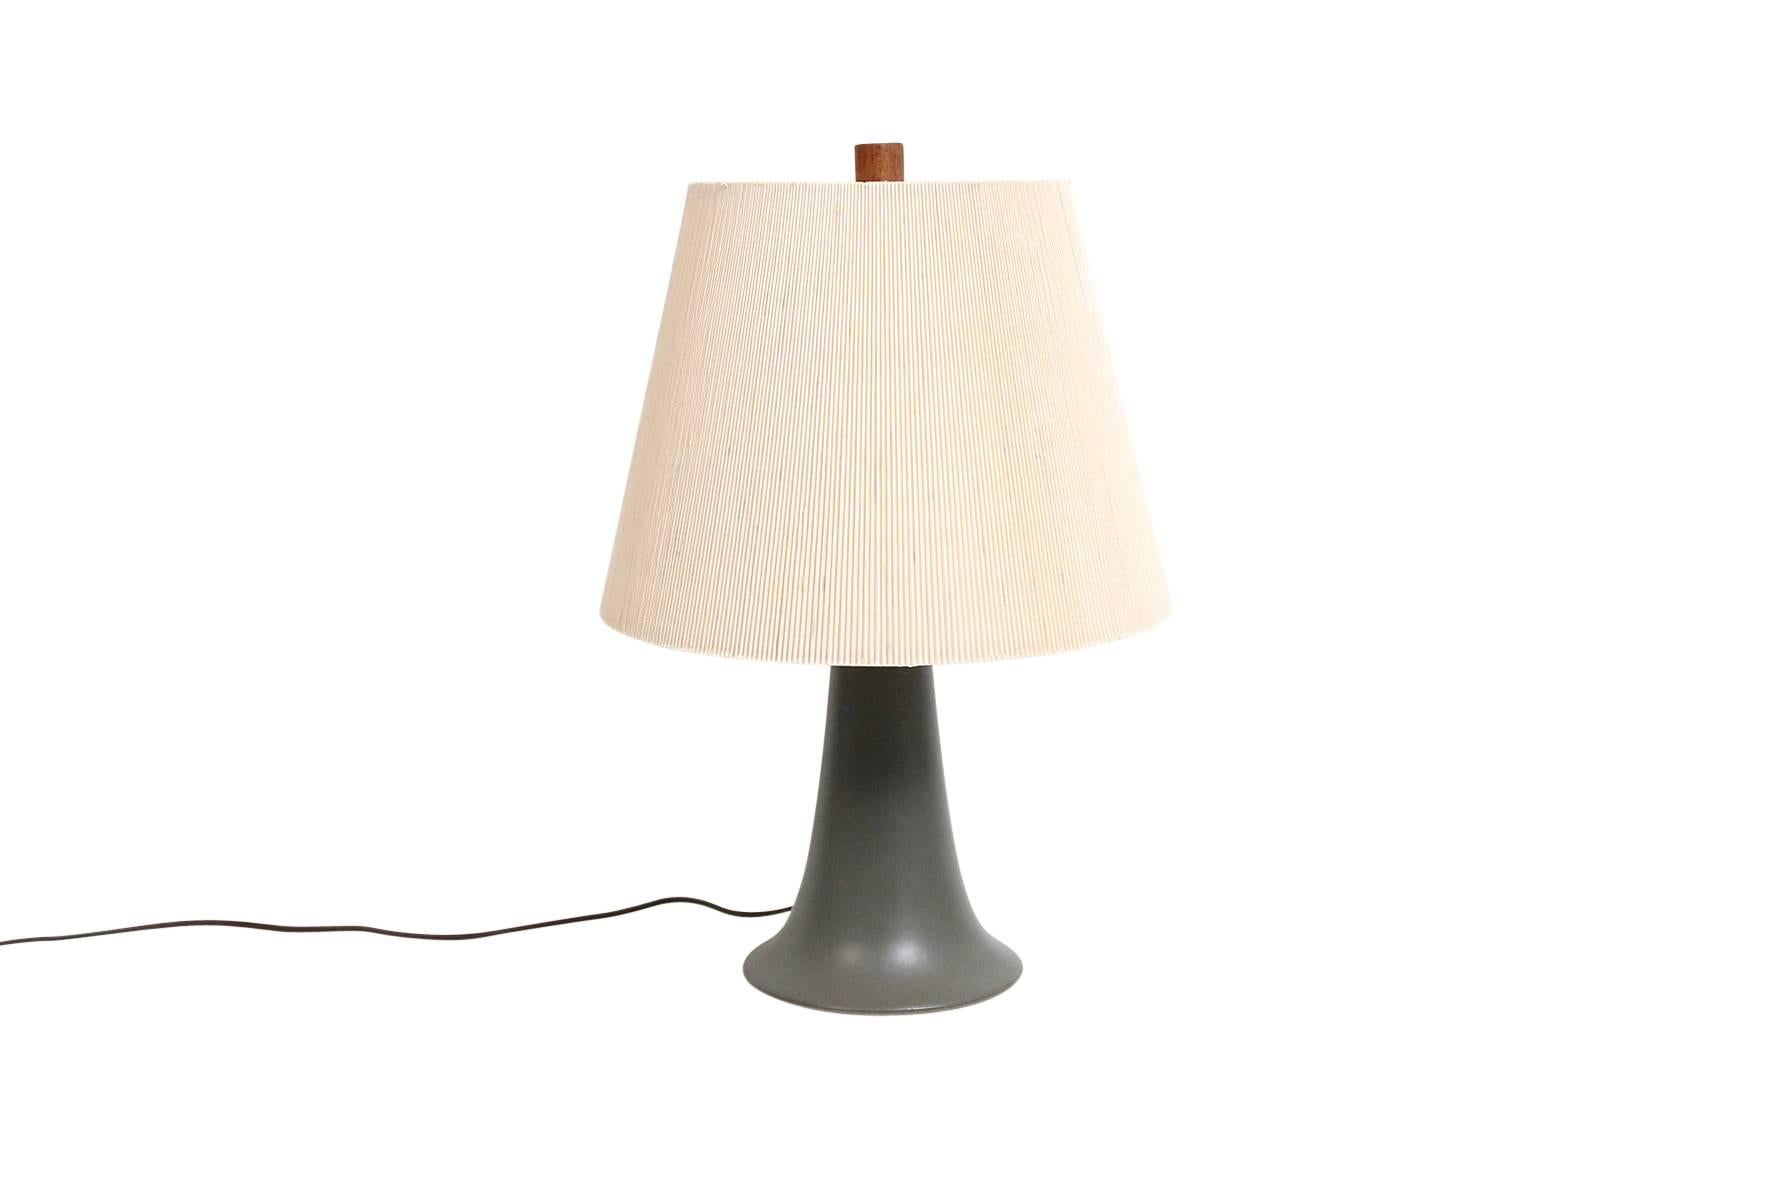 Mid-Century Modern Pair of Ceramic Table Lamps by Martz